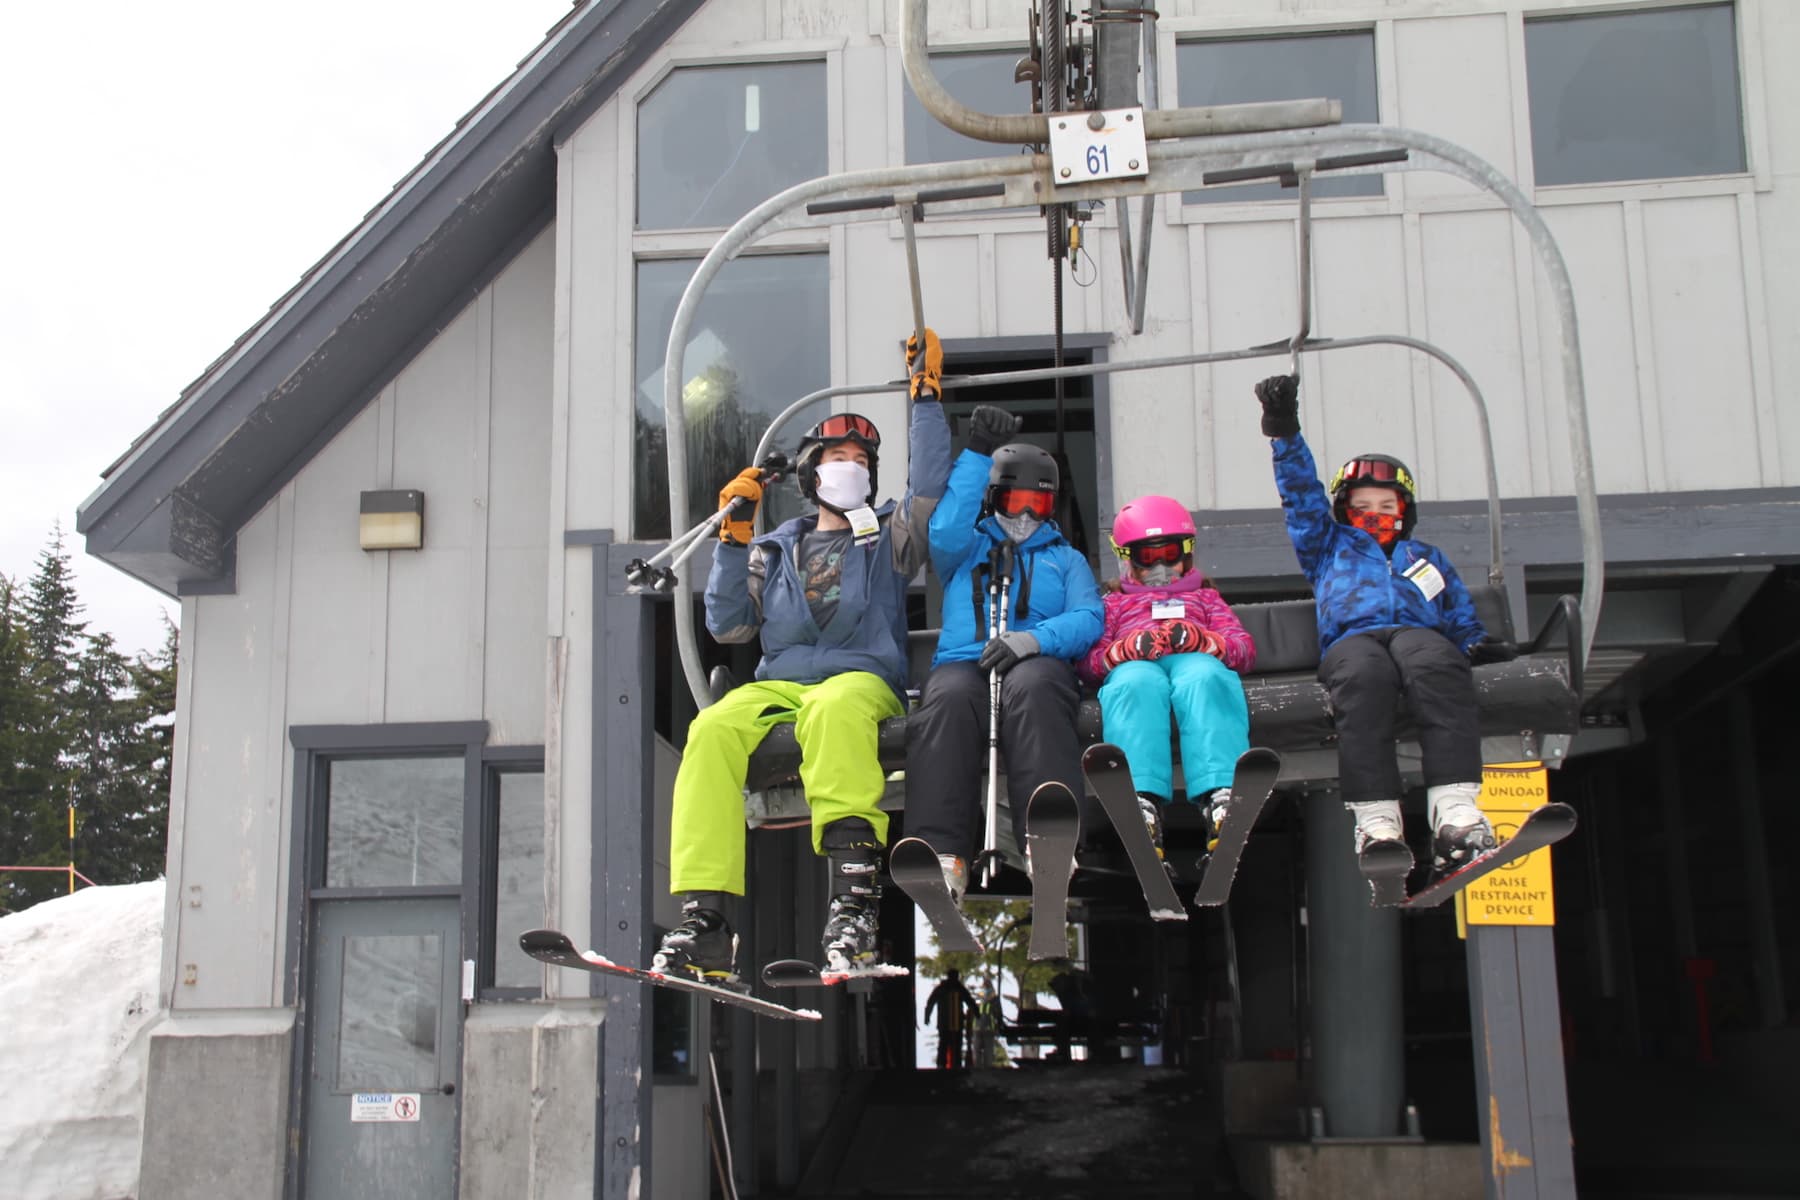 A family of four sits on a ski lift, geared up for the slopes and wearing face coverings.